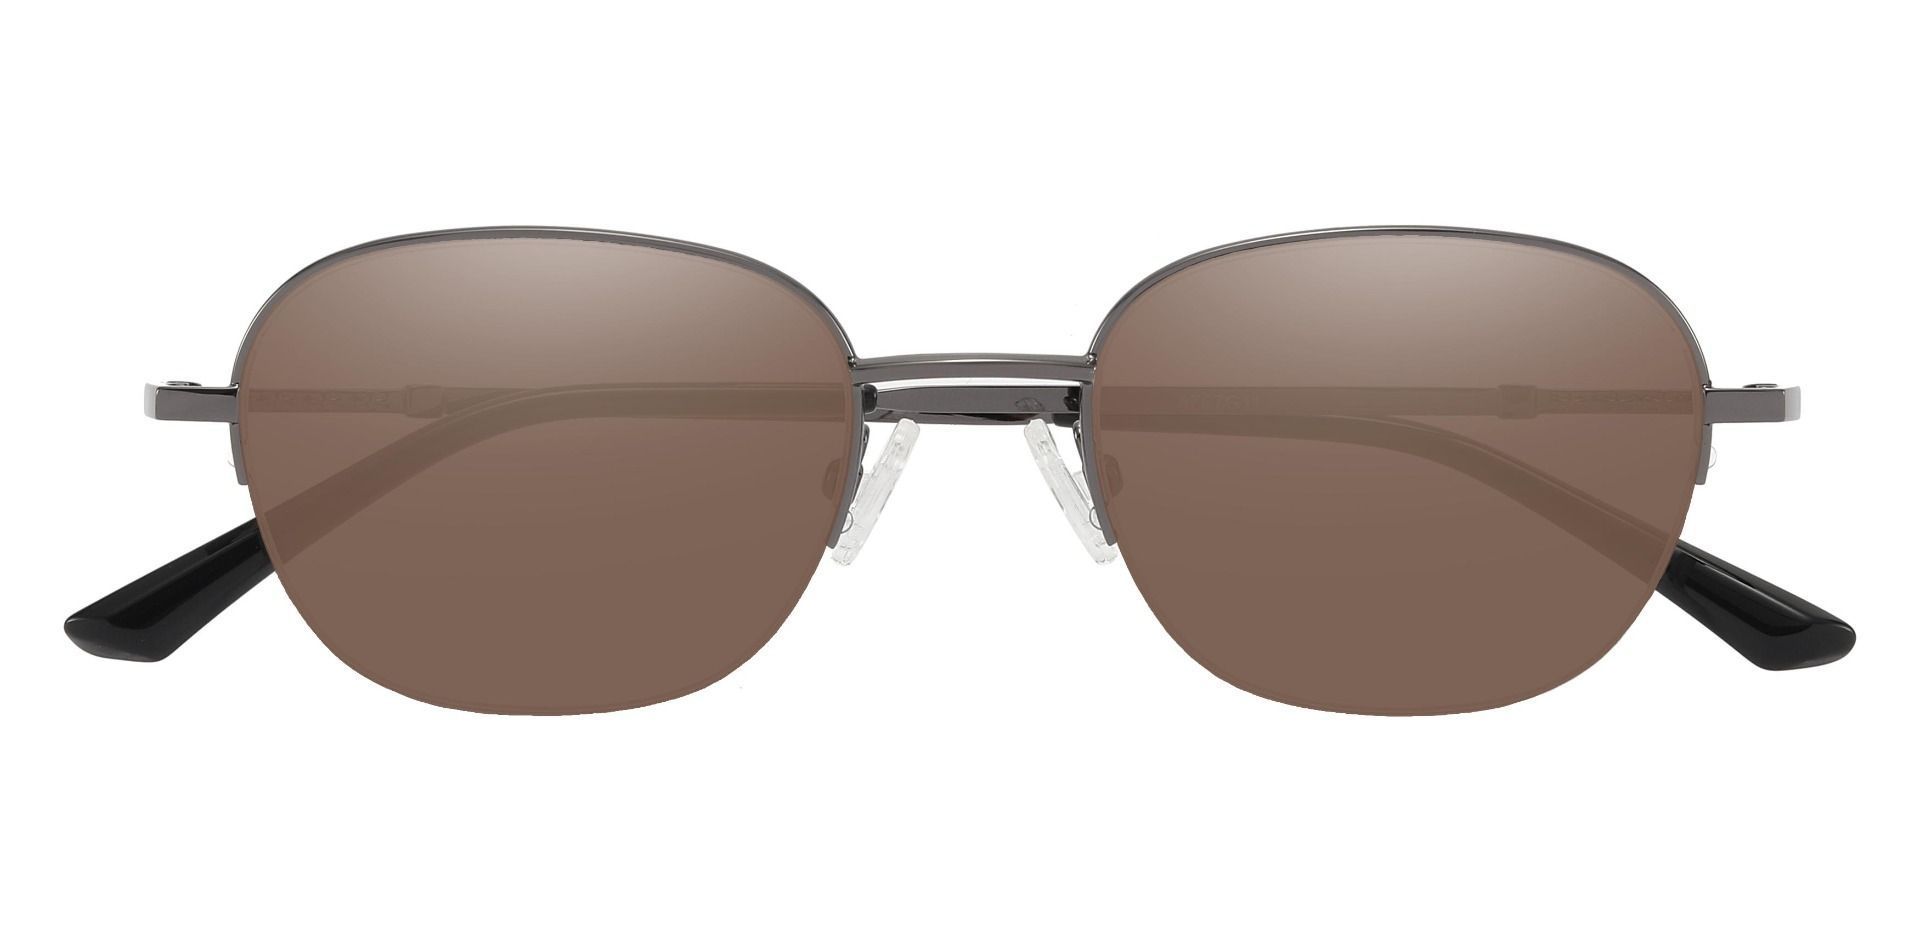 Rochester Oval Lined Bifocal Sunglasses - Gray Frame With Brown Lenses